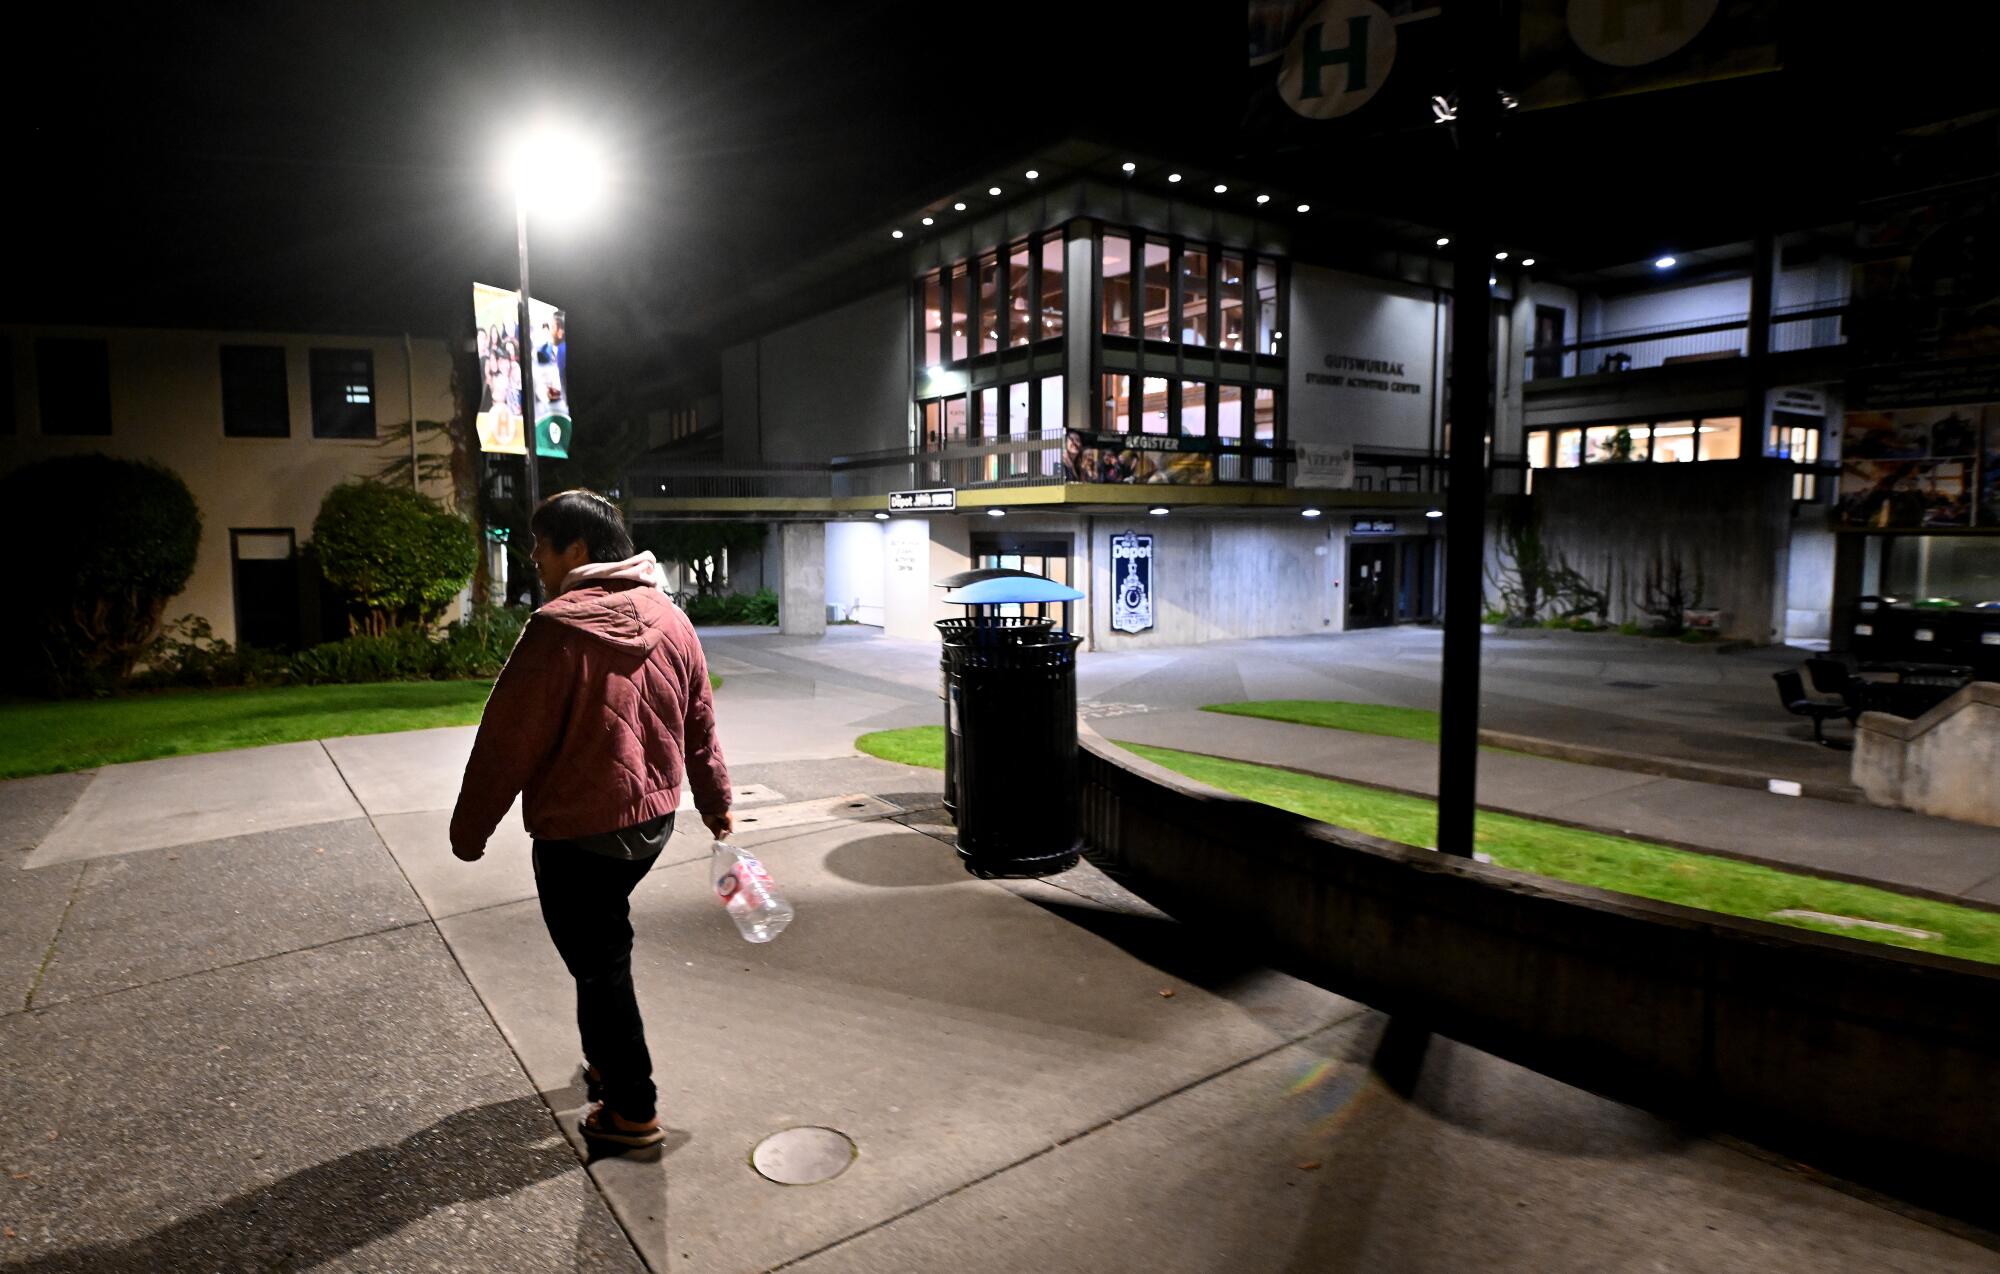 A person carrying an empty water container walks toward buildings at night.